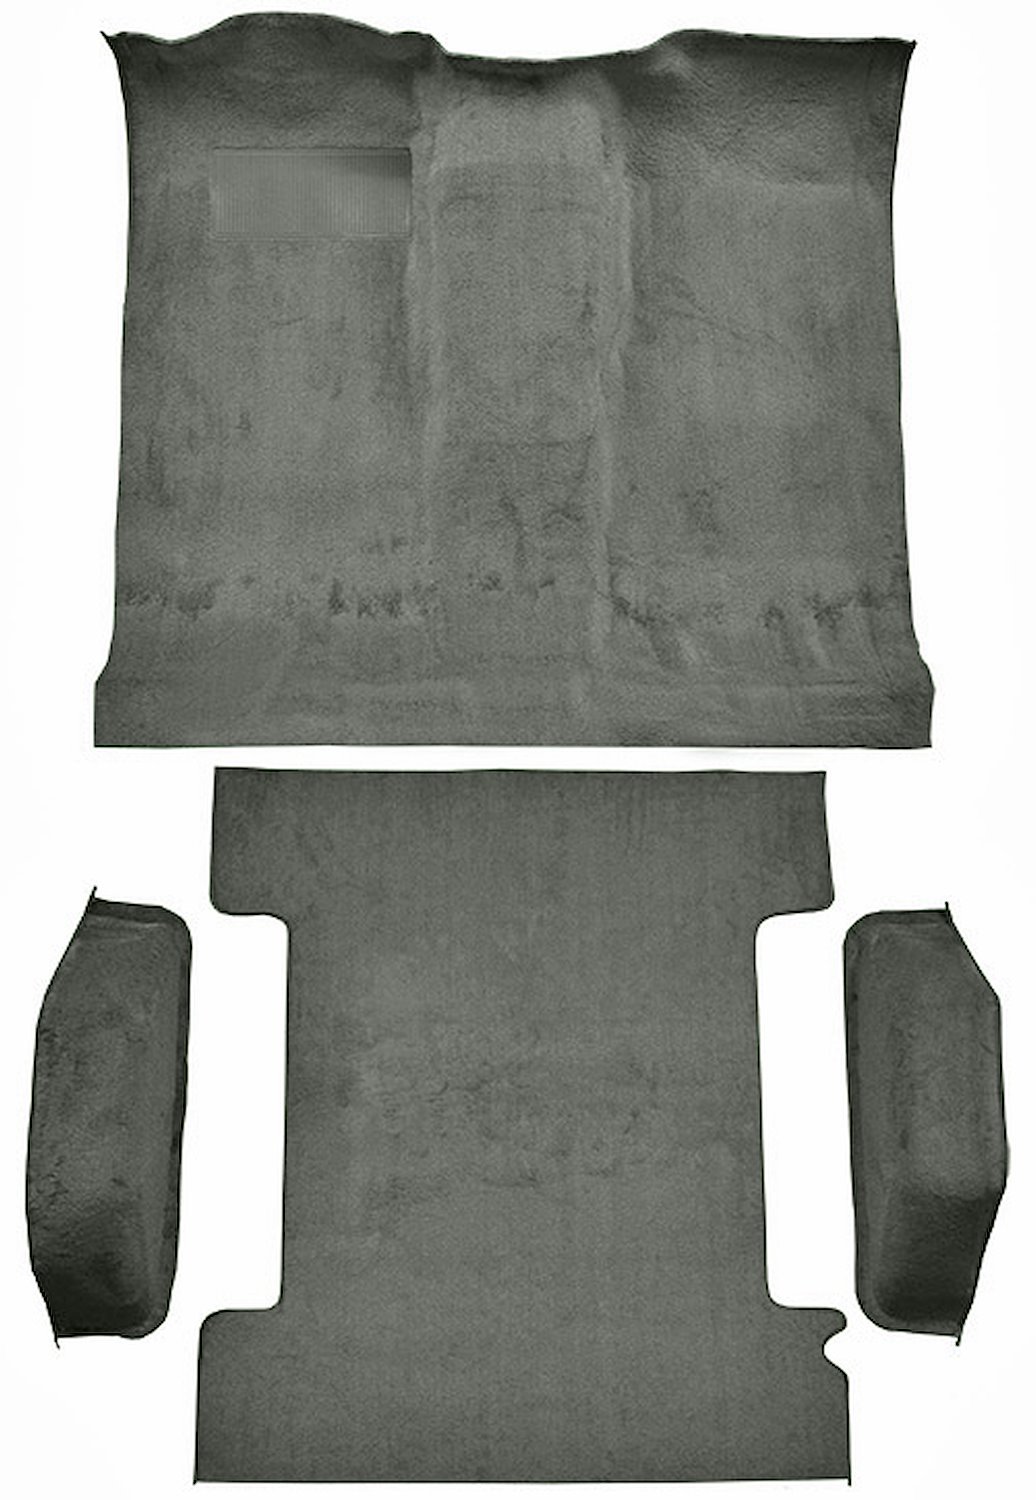 Molded Cut Pile Passenger and Cargo Area Carpet for 1974-1977 Chevy Blazer, GMC Jimmy [Mass Backing, 4-Piece, Silver]